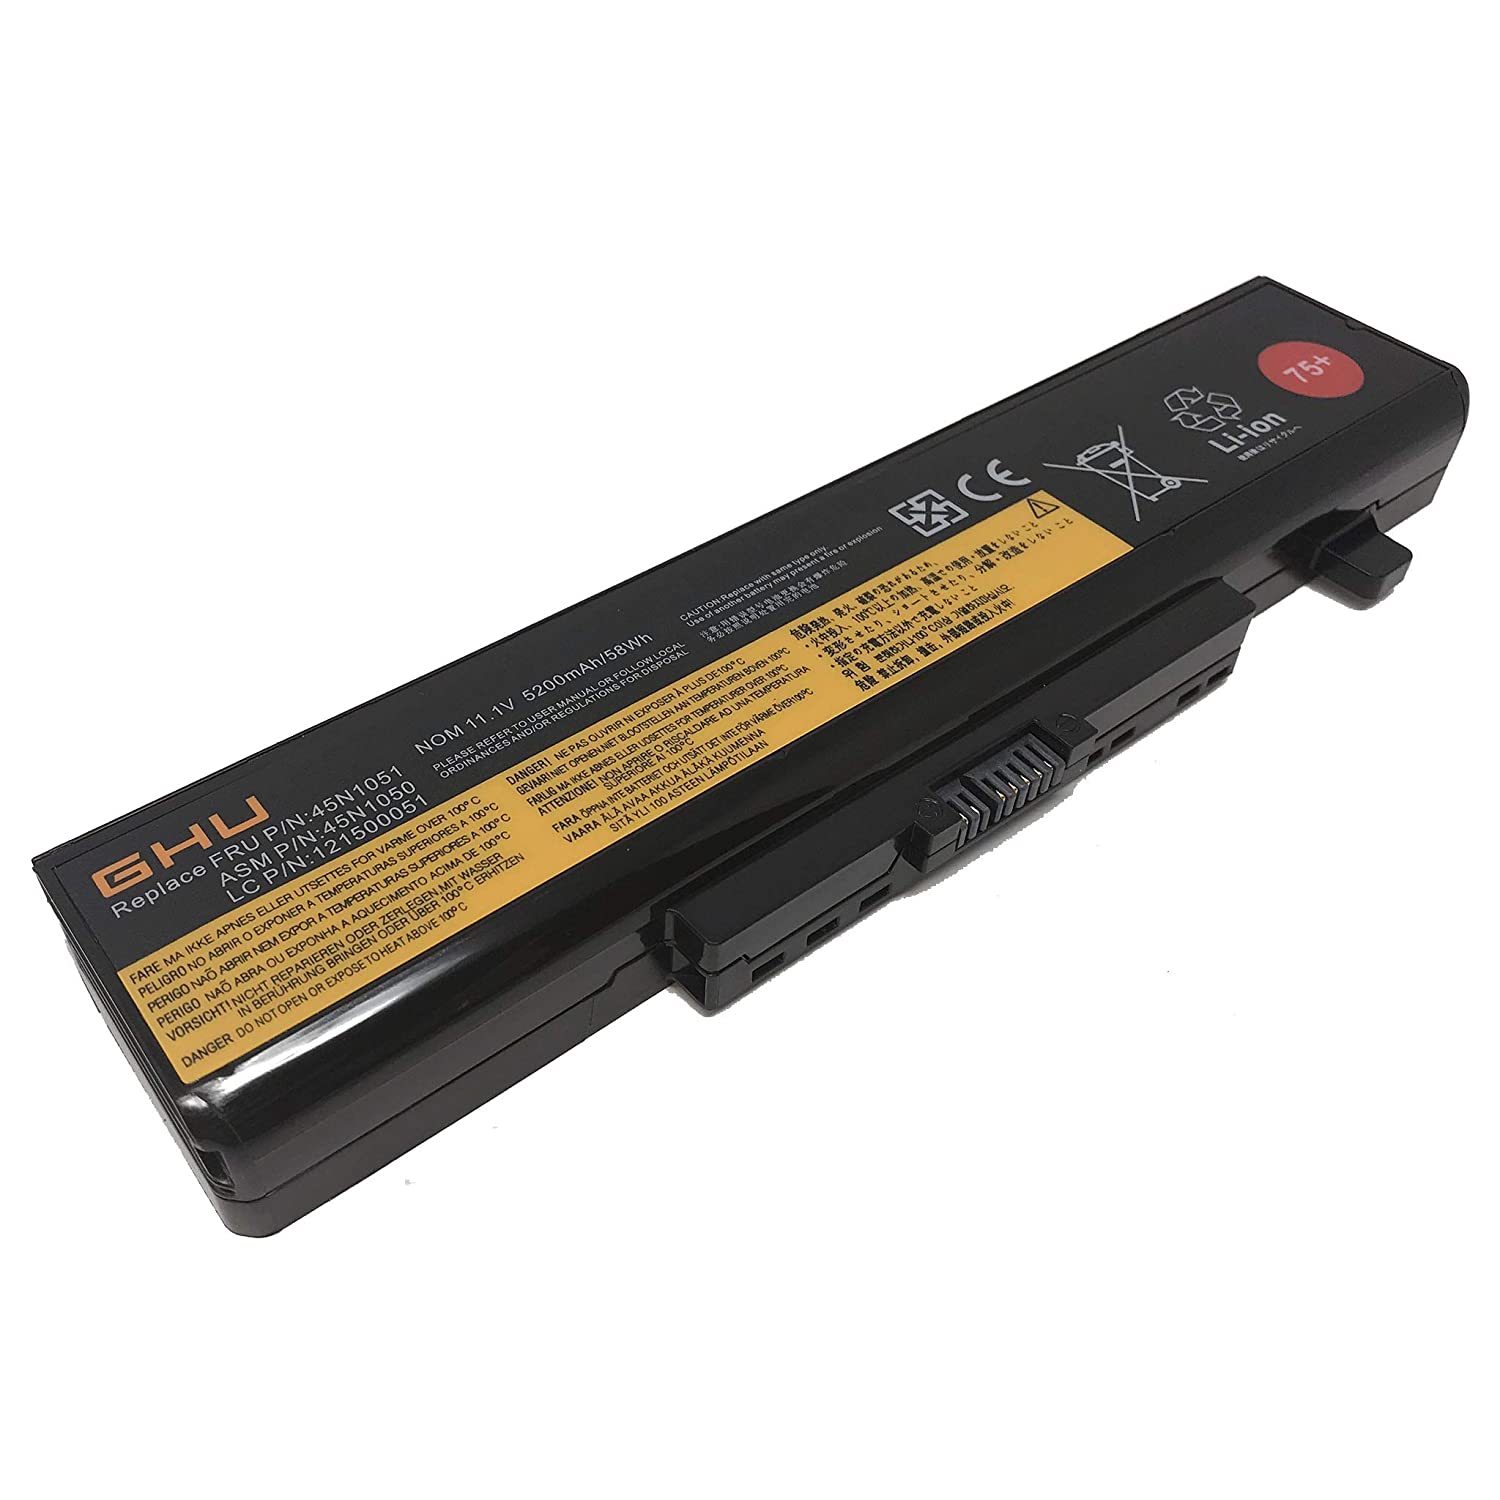 Primary image for new battery 58 wh compatible with lenovo thinkpad g580 y580 g480 g485 g585 y480 